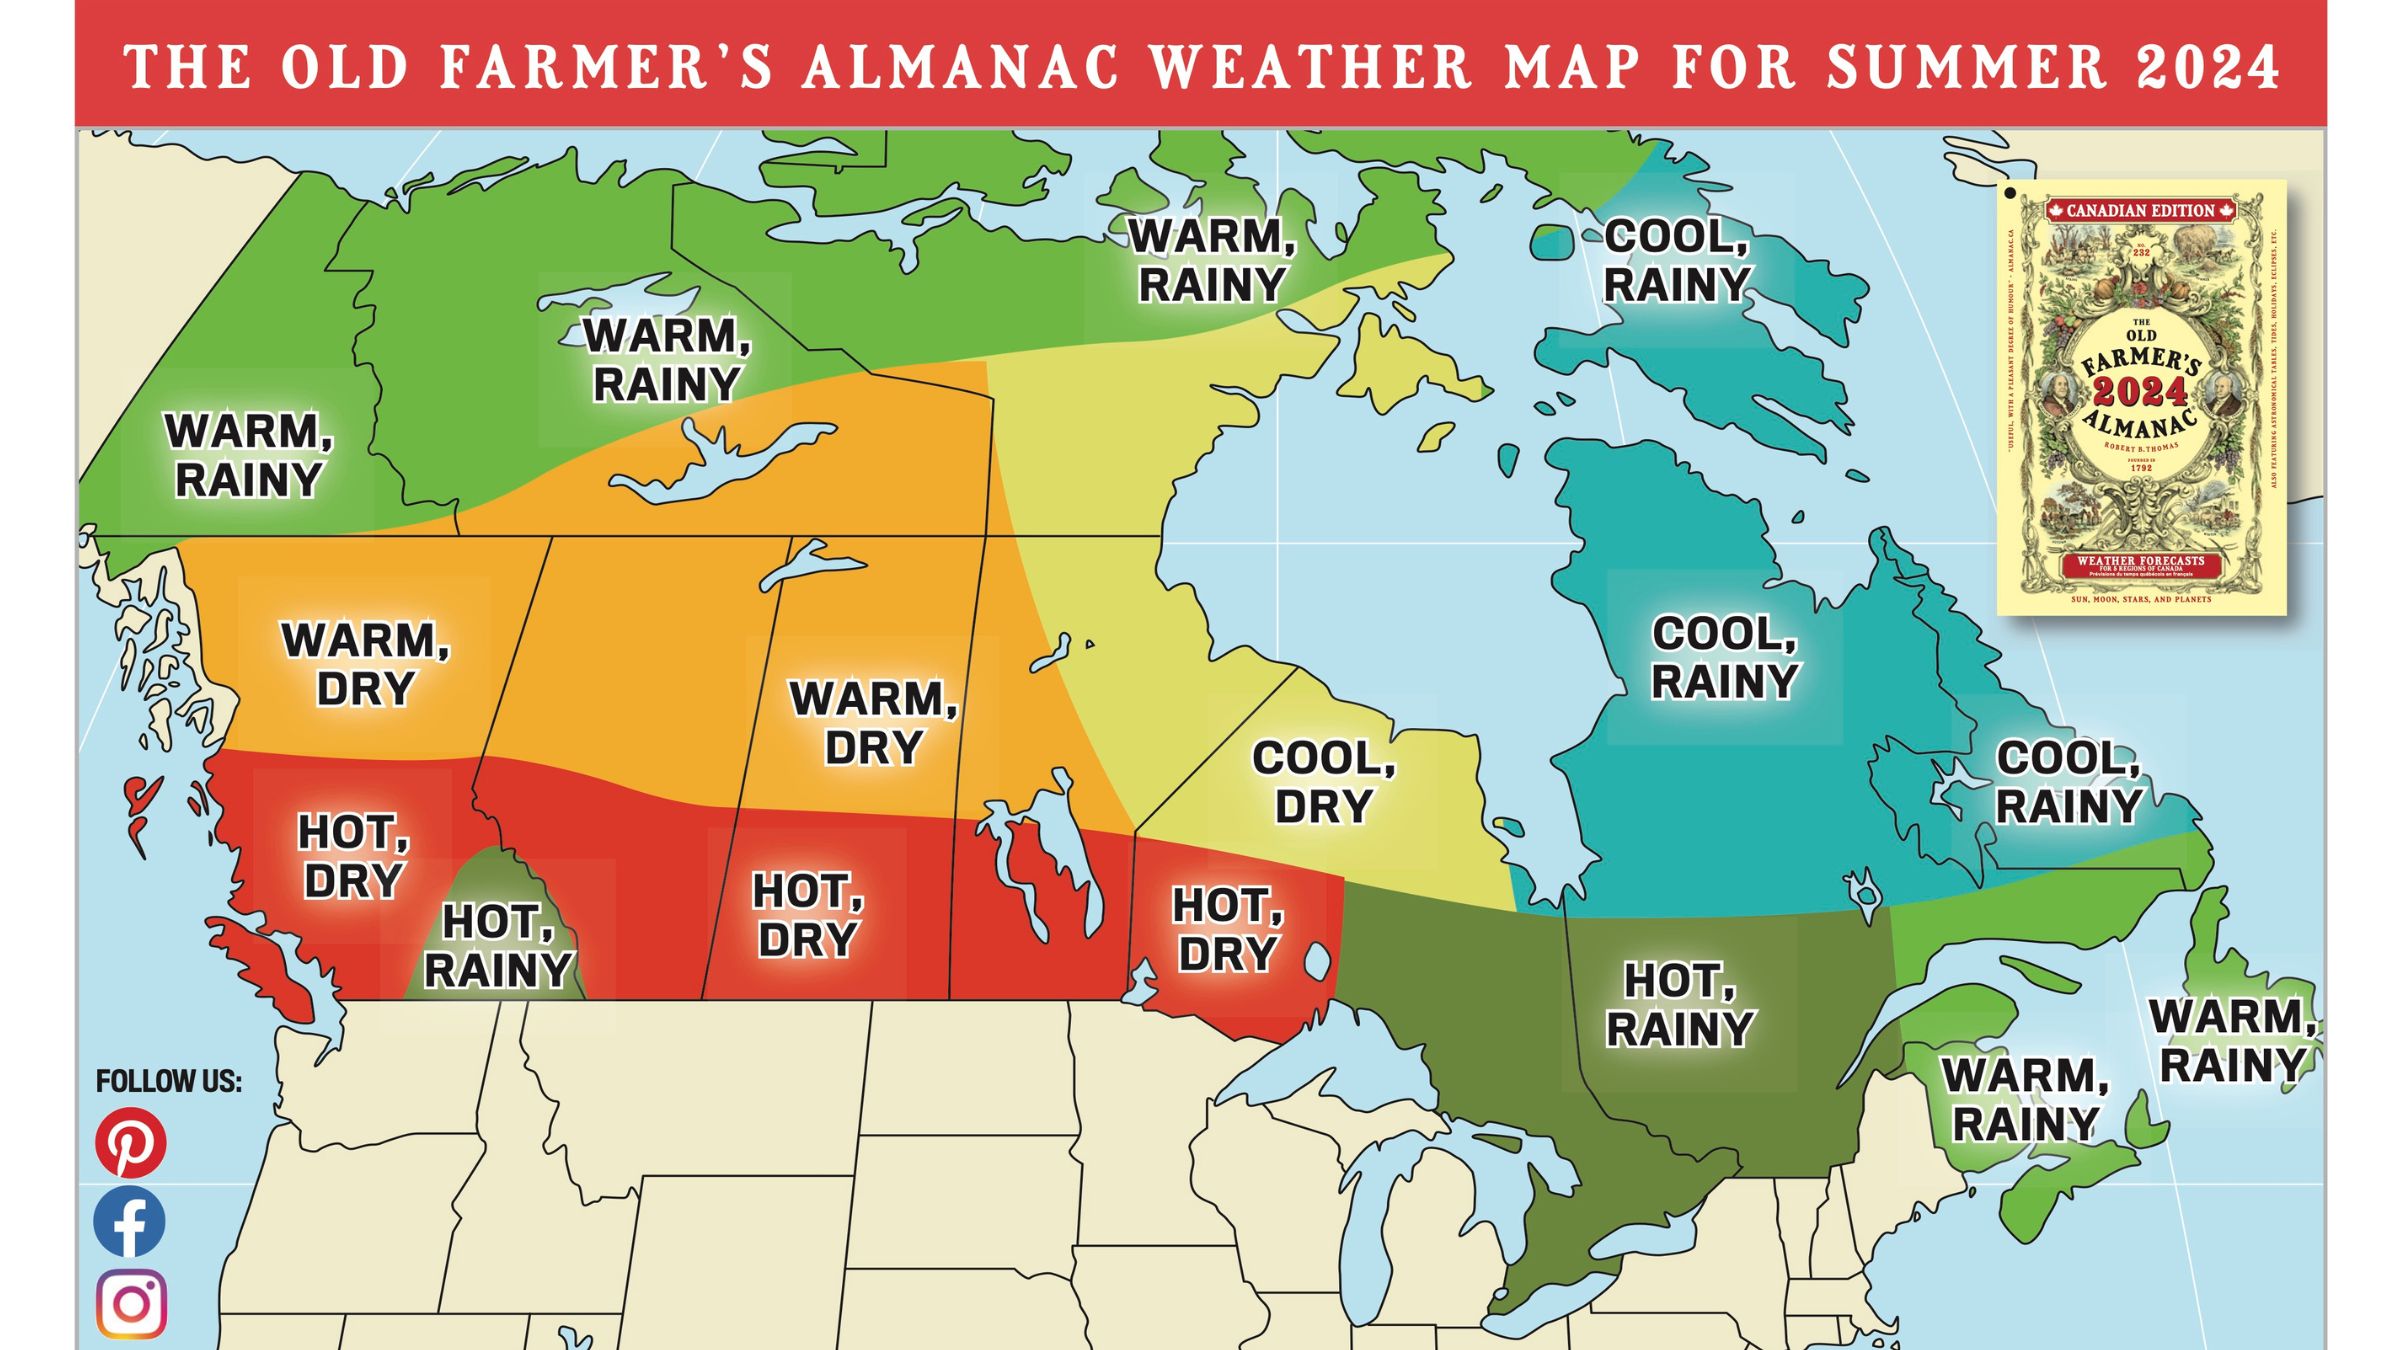 Old farmer's almanac summer 2024 weather map for Canada